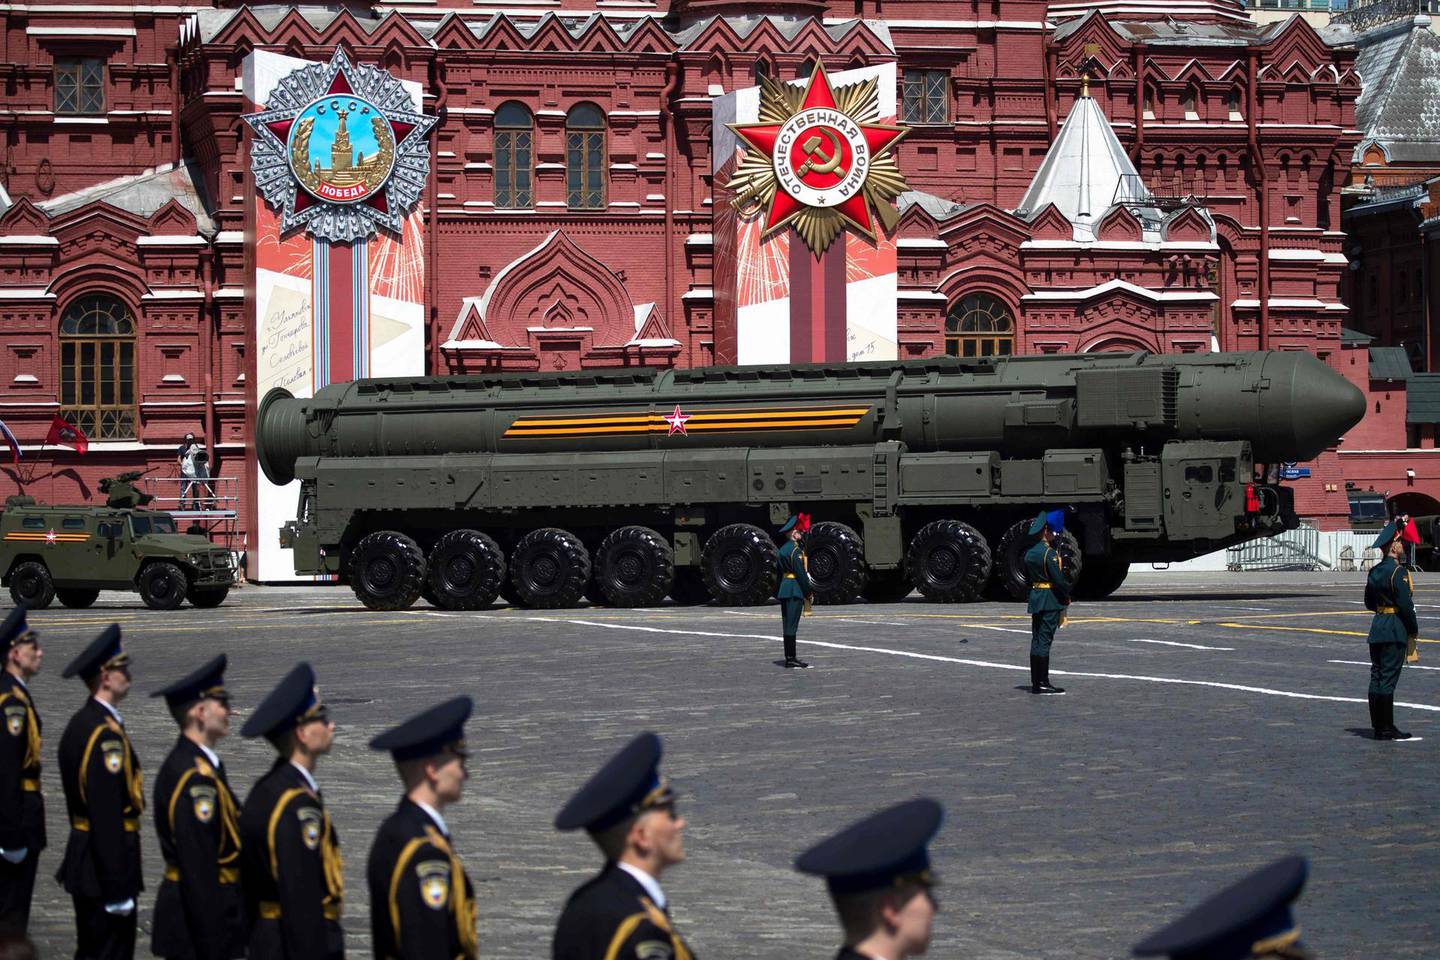 (FILES) In this file photo Russian army RS-24 Yars ballistic missile system moves through Red Square during a military parade, which marks the 75th anniversary of the Soviet victory over Nazi Germany in World War Two, in Moscow on June 24, 2020. US President Joe Biden's administration on February 3, 2021 extended the New START nuclear treaty with Russia by five years, saying it hoped to prevent an arms race despite rising tensions with Moscow including over its imprisonment of opposition leader Alexei Navalny. One day before the treaty was set to expire, Secretary of State Antony Blinken said the United States was extending New START by the maximum allowed time of five years.
 / AFP / POOL / Pavel Golovkin
